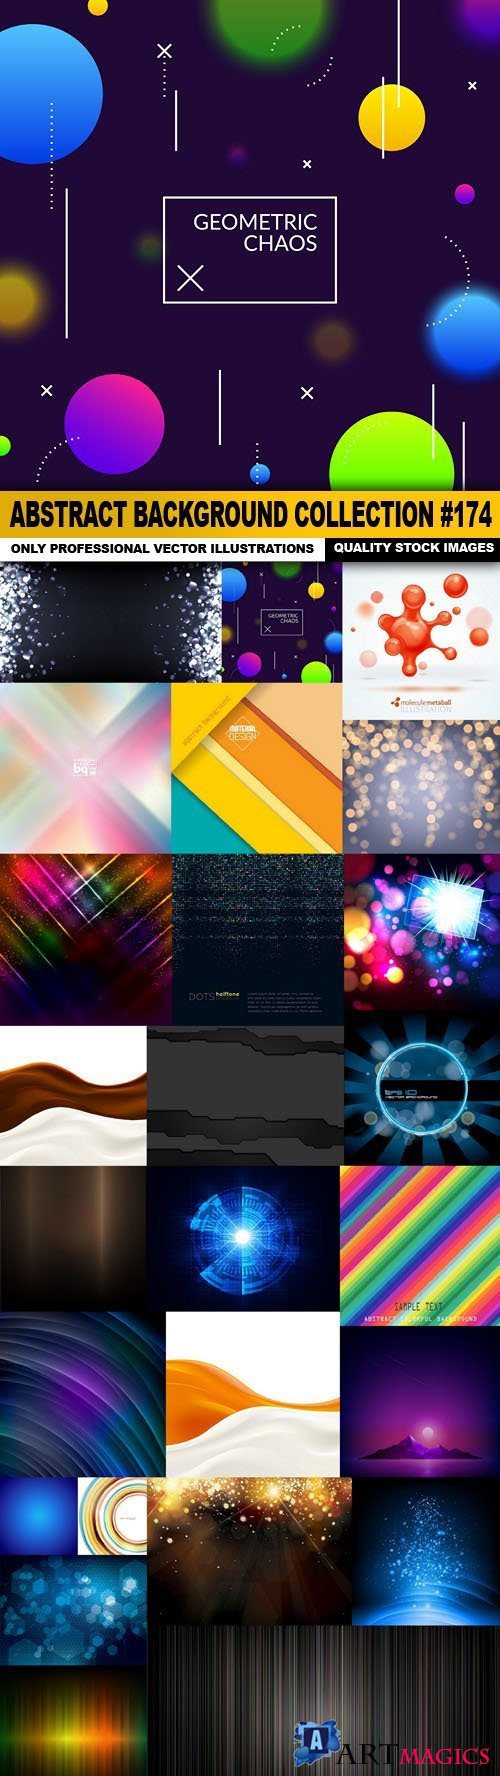 Abstract Background Collection #174 - 25 Vector